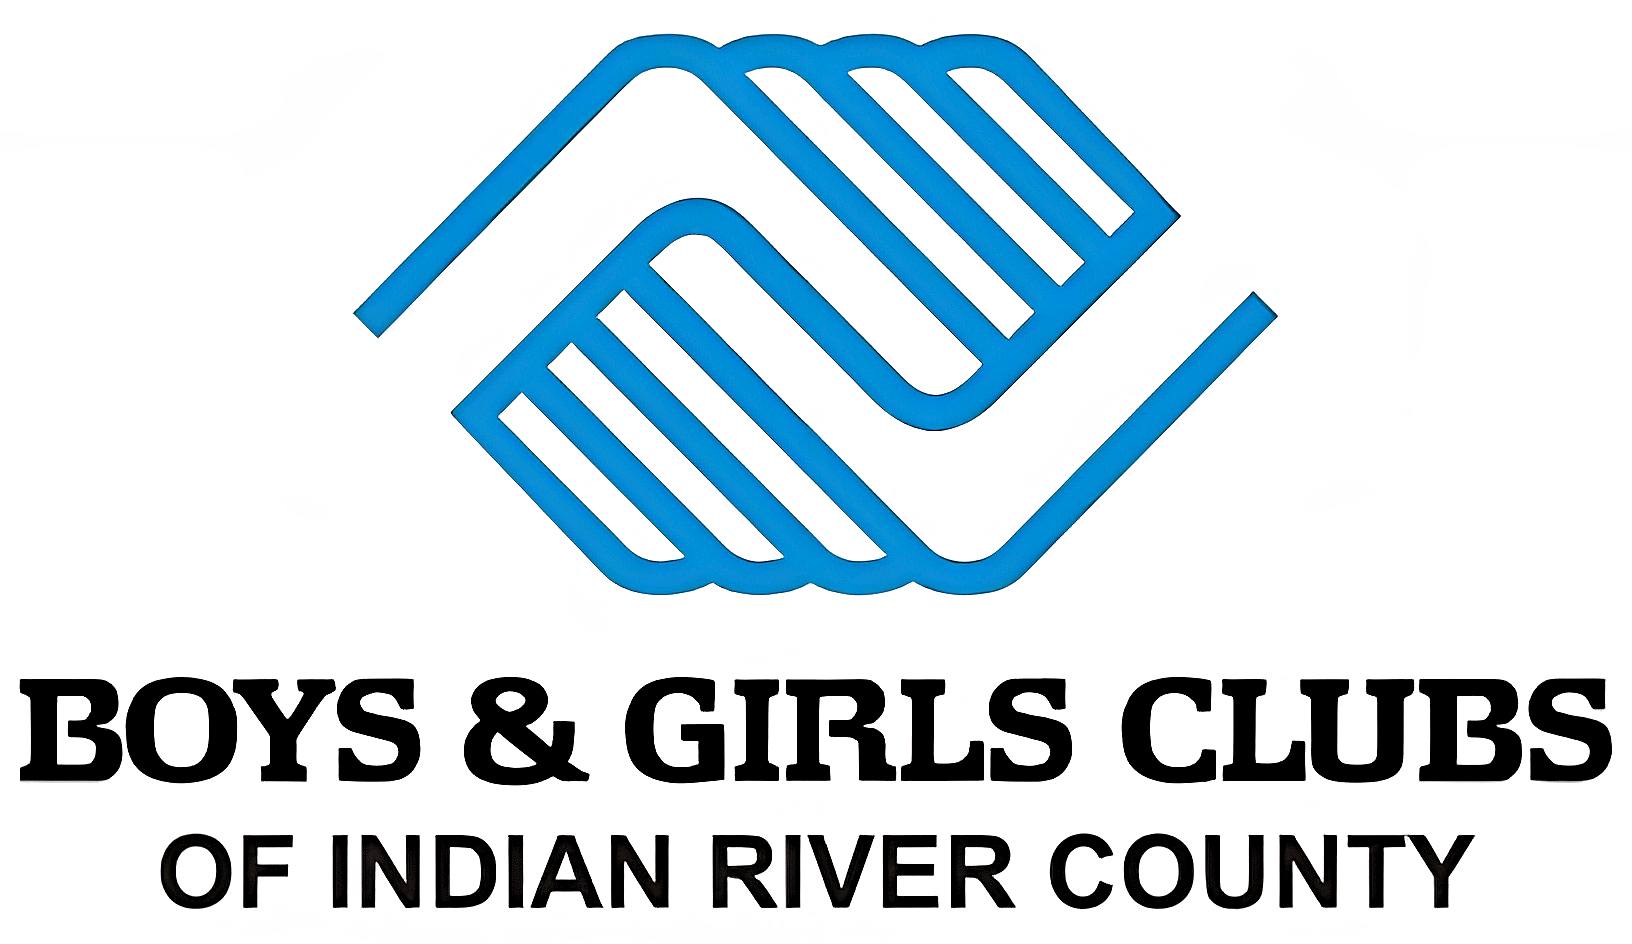 Weekly Insights: The Boys & Girls Clubs of Indian River County